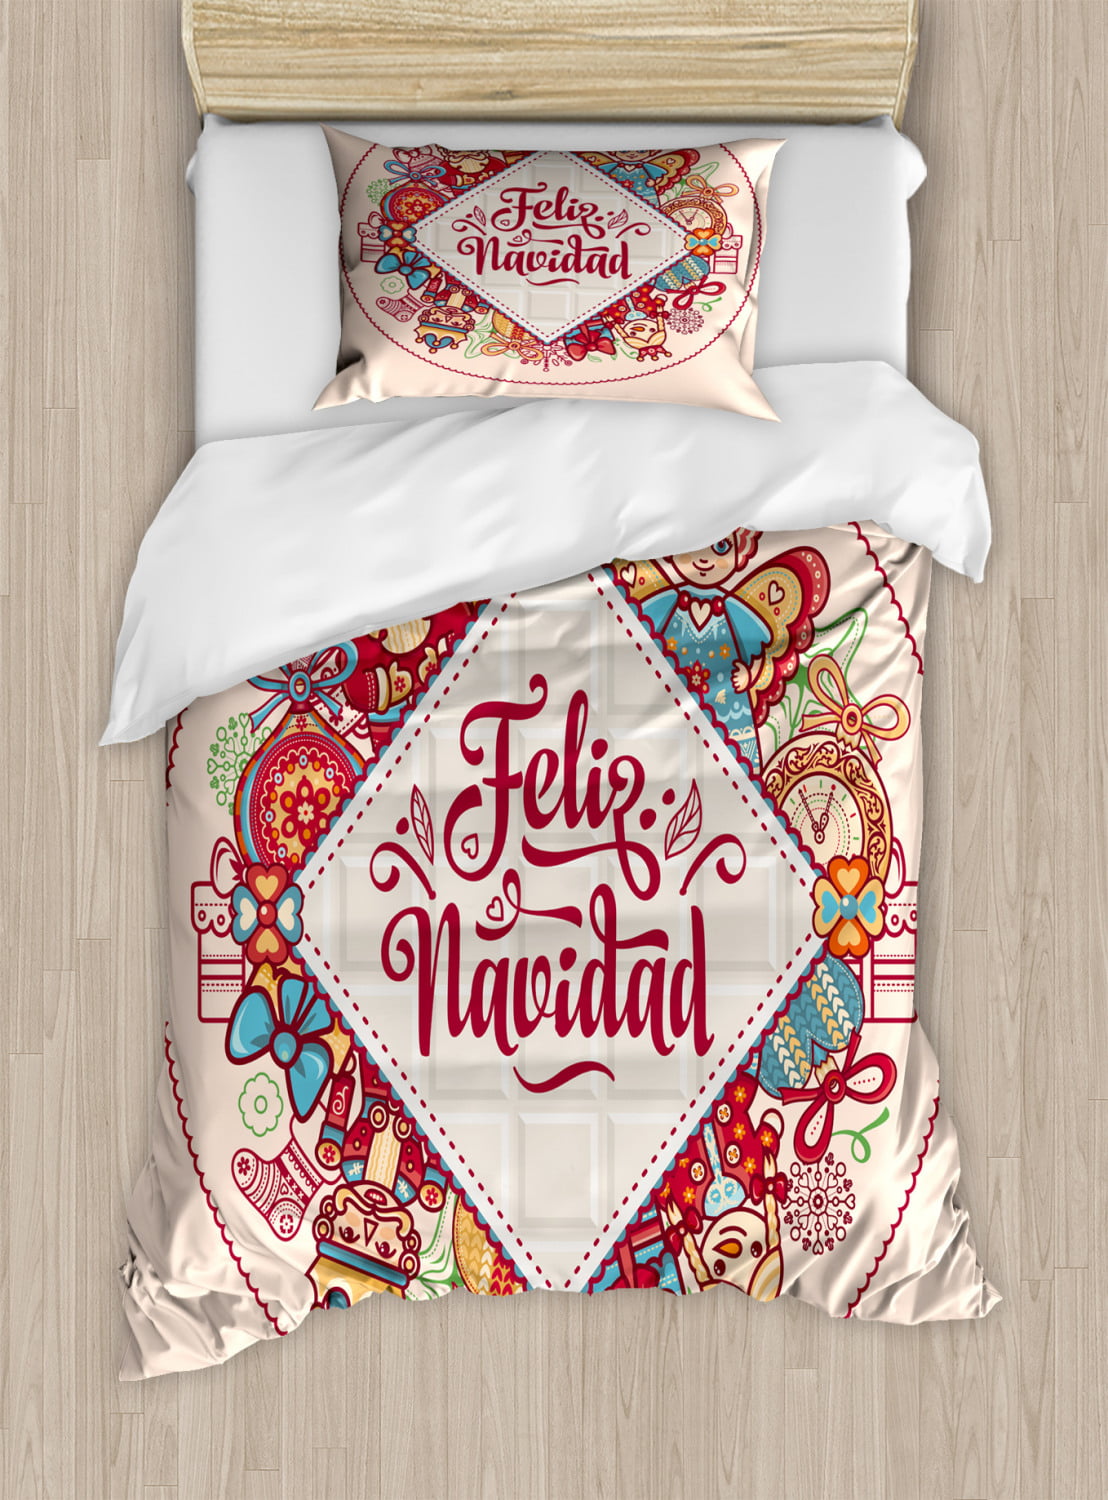 Spanish Duvet Cover Set Queen Size, Christmas Elements and Celebration  Theme Feliz Navidad Message in Spanish Language, Decorative 3 Piece Bedding  Set with 2 Pillow Shams, Multicolor, by Ambesonne 